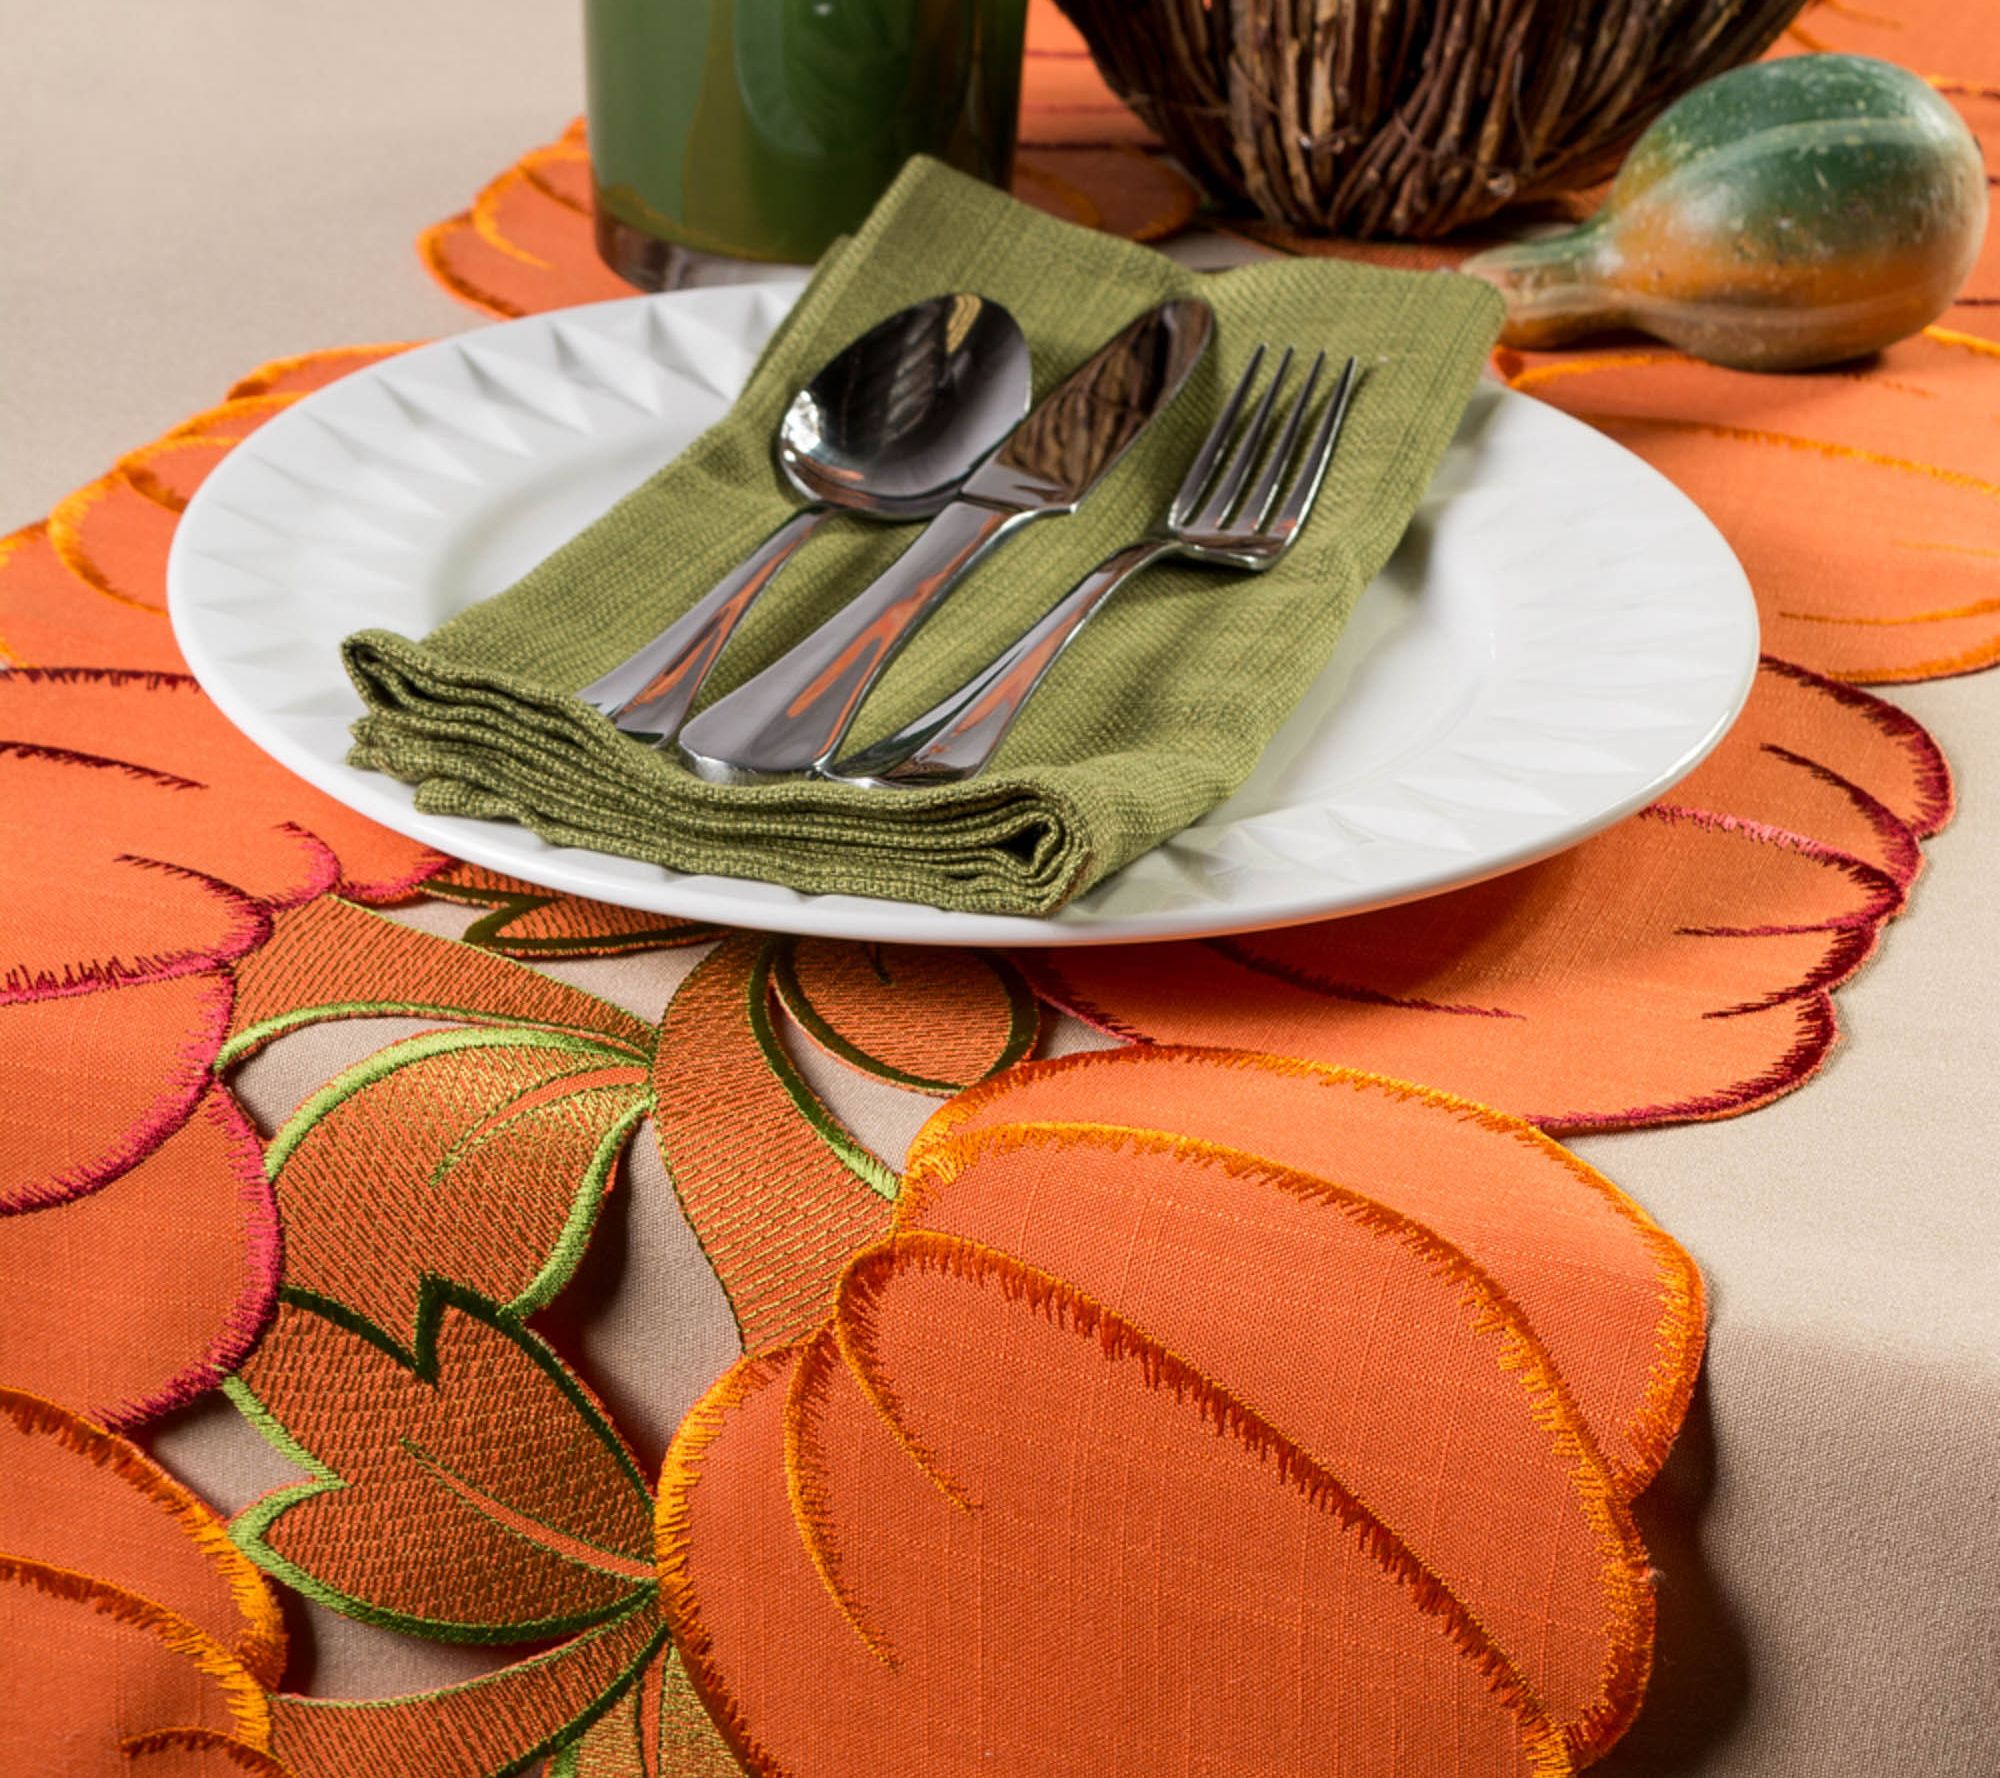 Design Imports Embroidered Pumpkins Table Runner - QVC.com